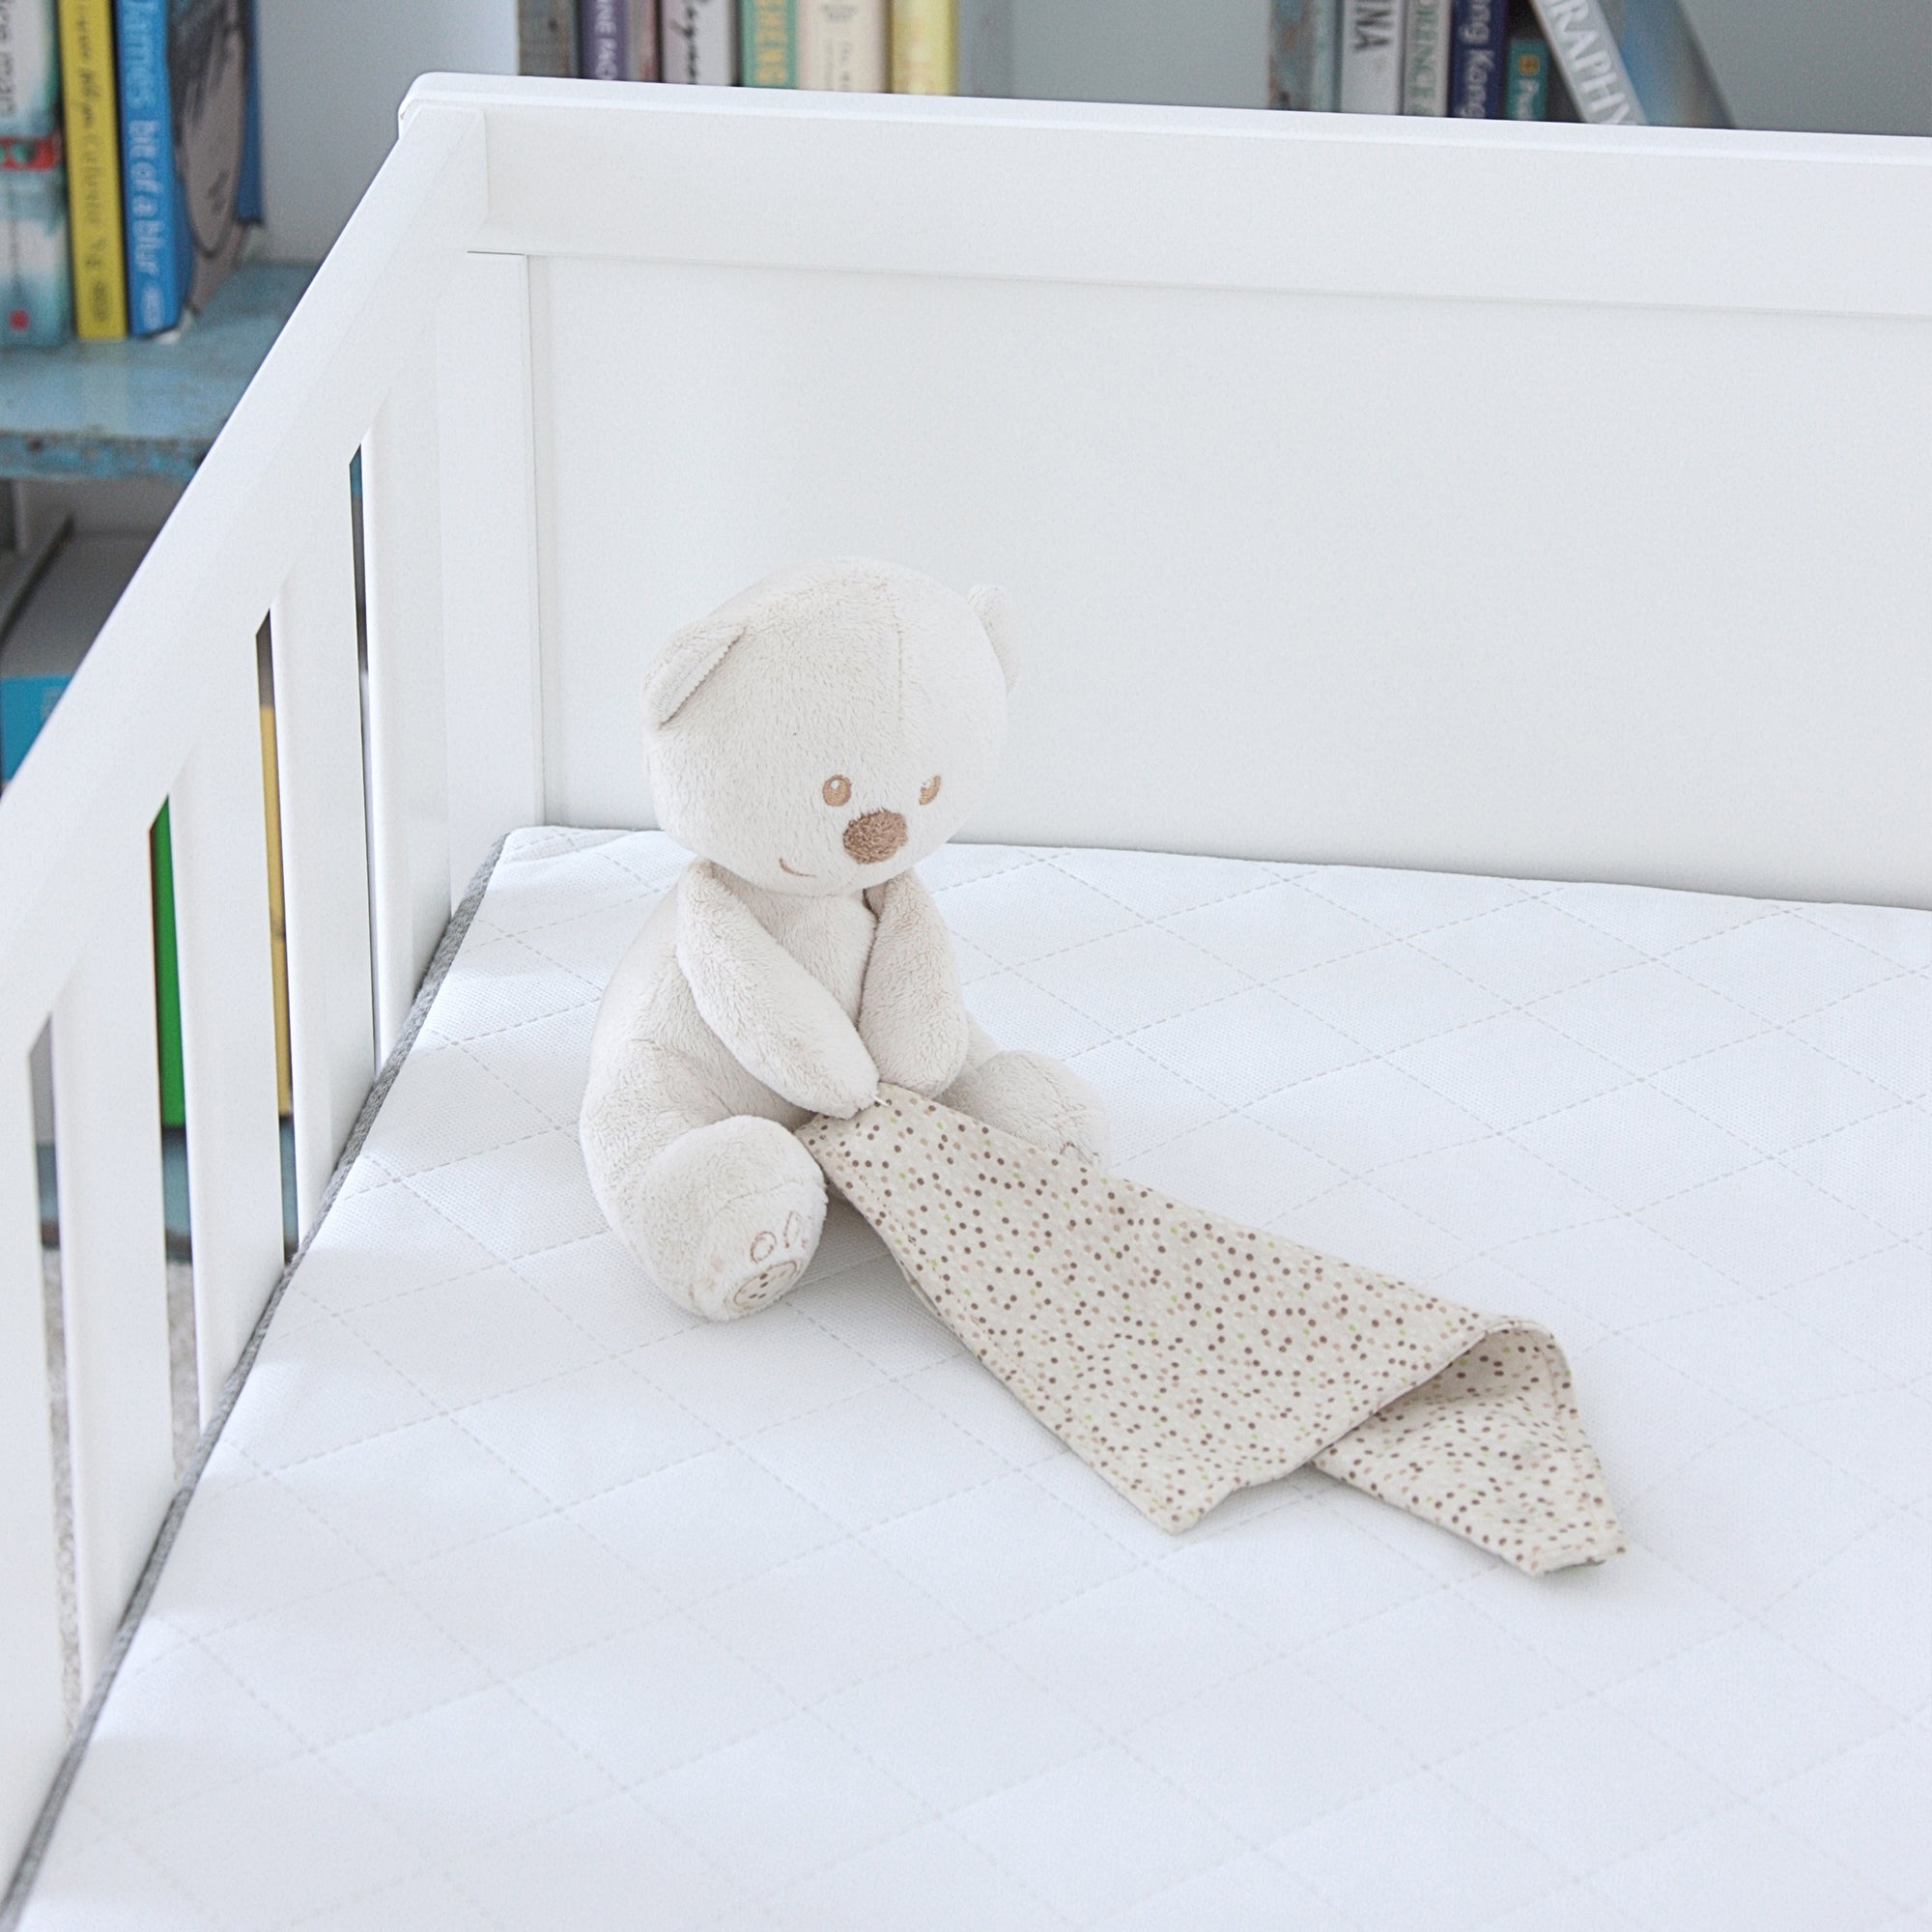 Cool Ecoflow Baby Mattress 120x60cm - 15% OFF Applied at Checkout